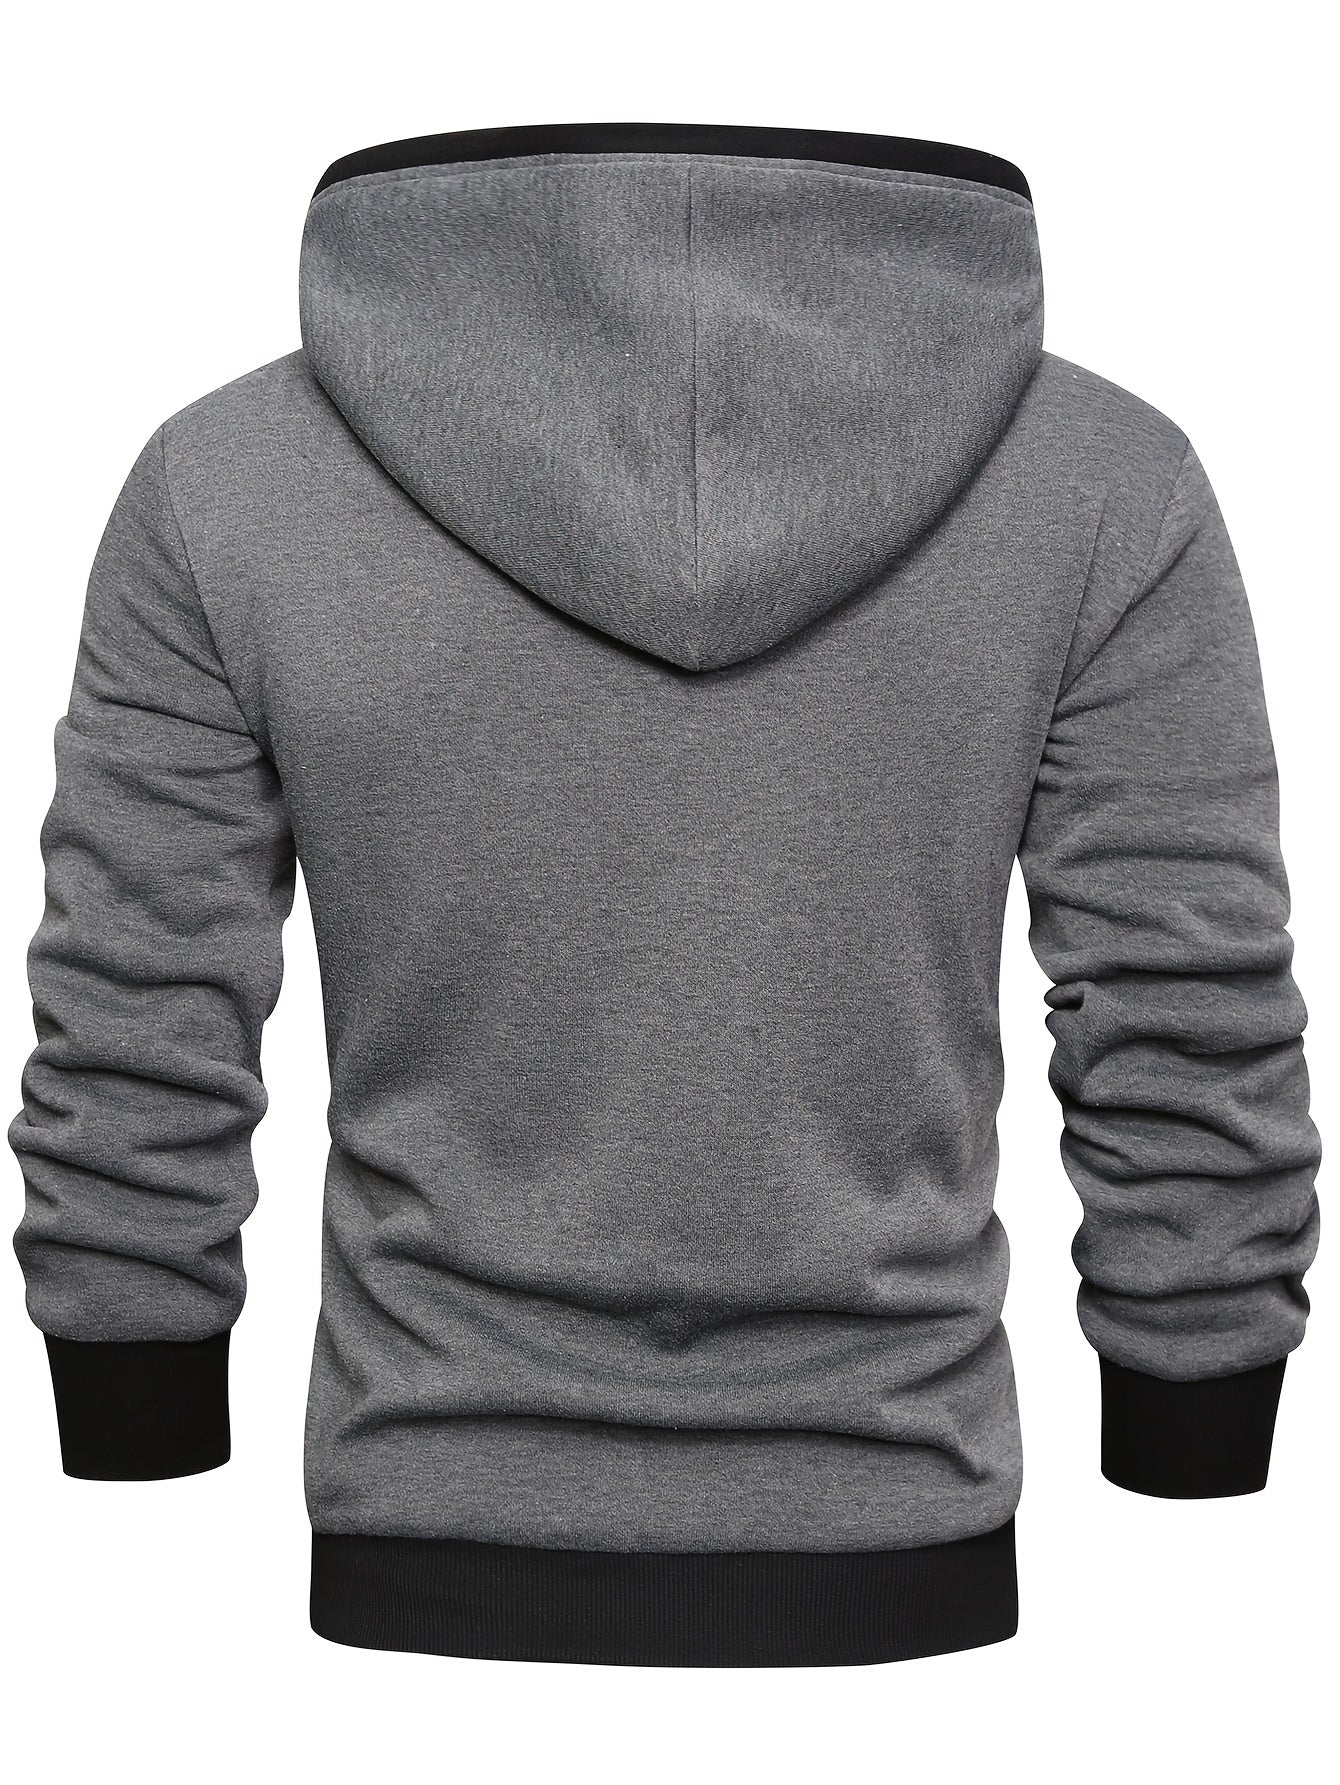 Cool Solid Hoodies For Men, Men's Casual Classic Design Pullover Hooded Sweatshirt With Kangaroo Pocket Streetwear For Winter Fall, As Gifts